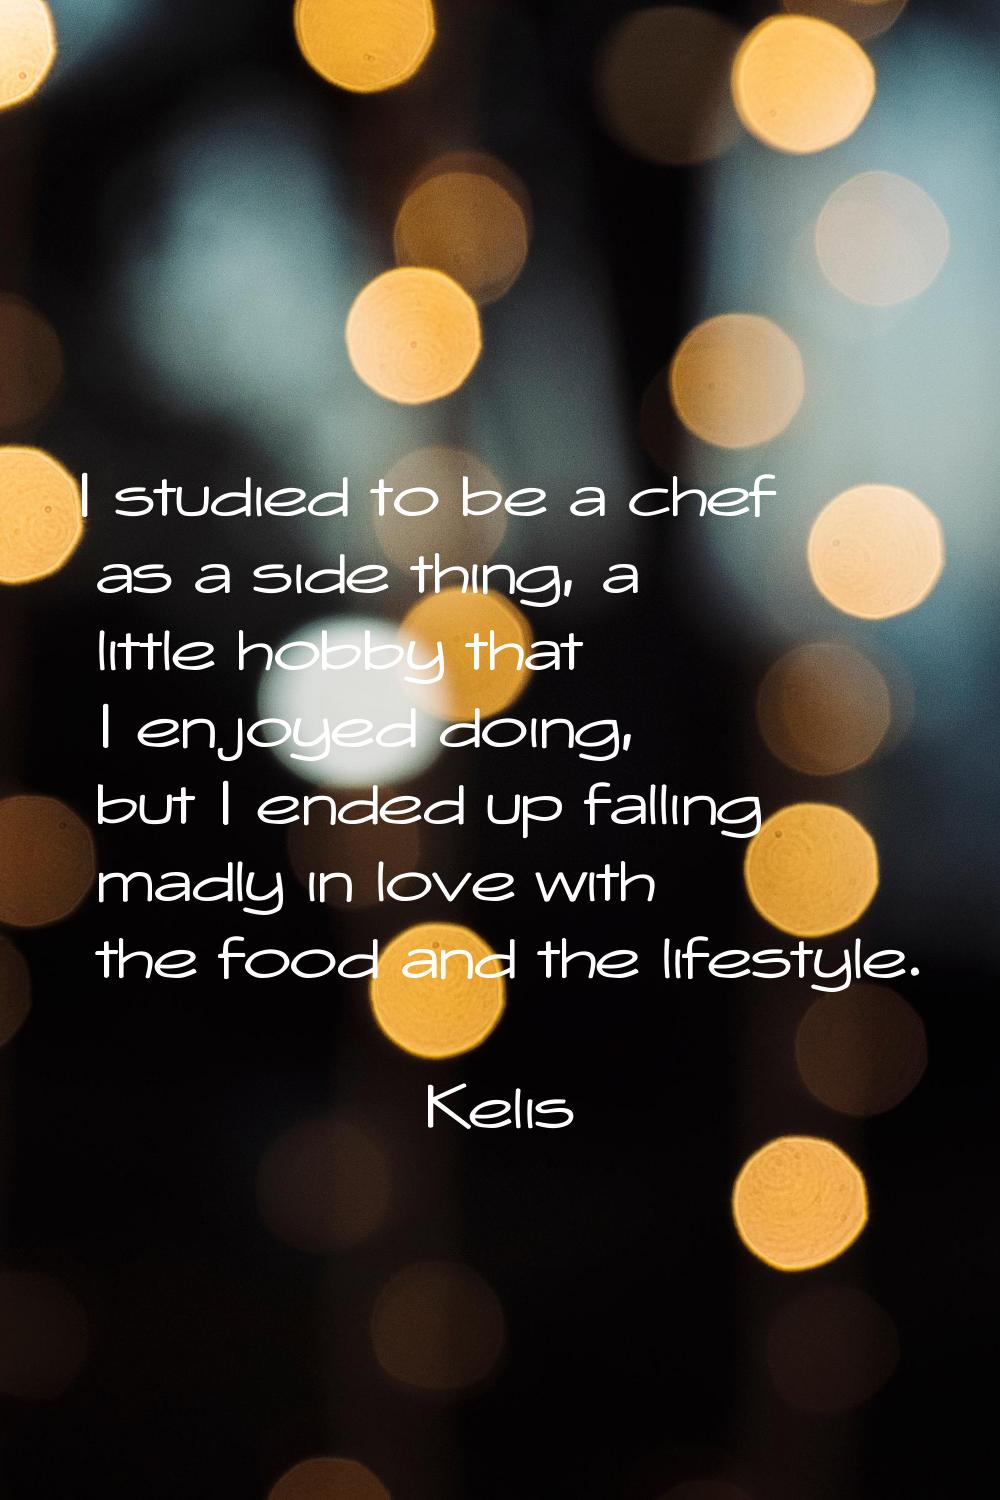 I studied to be a chef as a side thing, a little hobby that I enjoyed doing, but I ended up falling